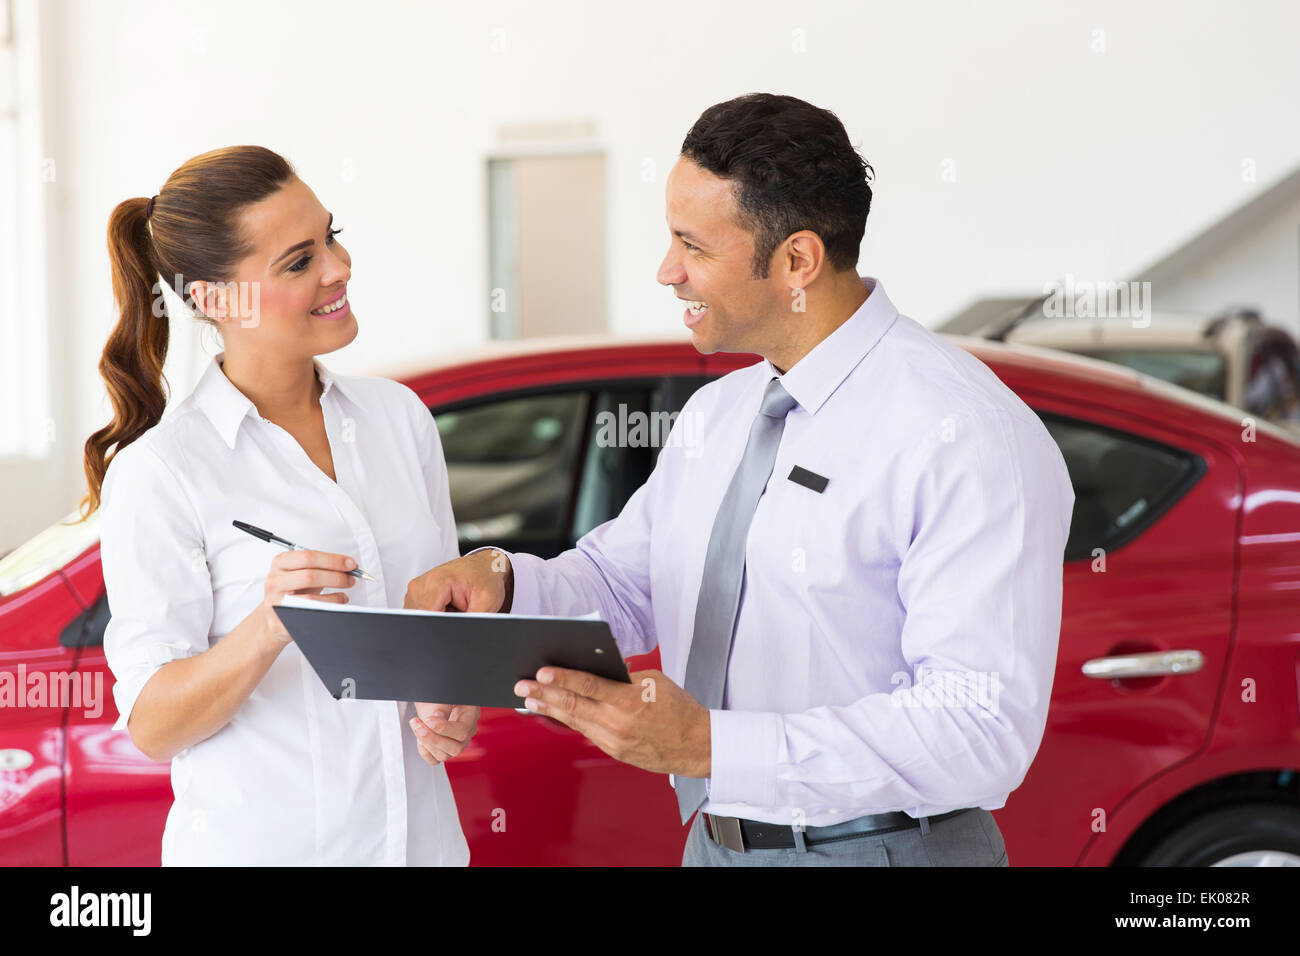 friendly mid age car salesman just made a sale to young customer Stock Photo